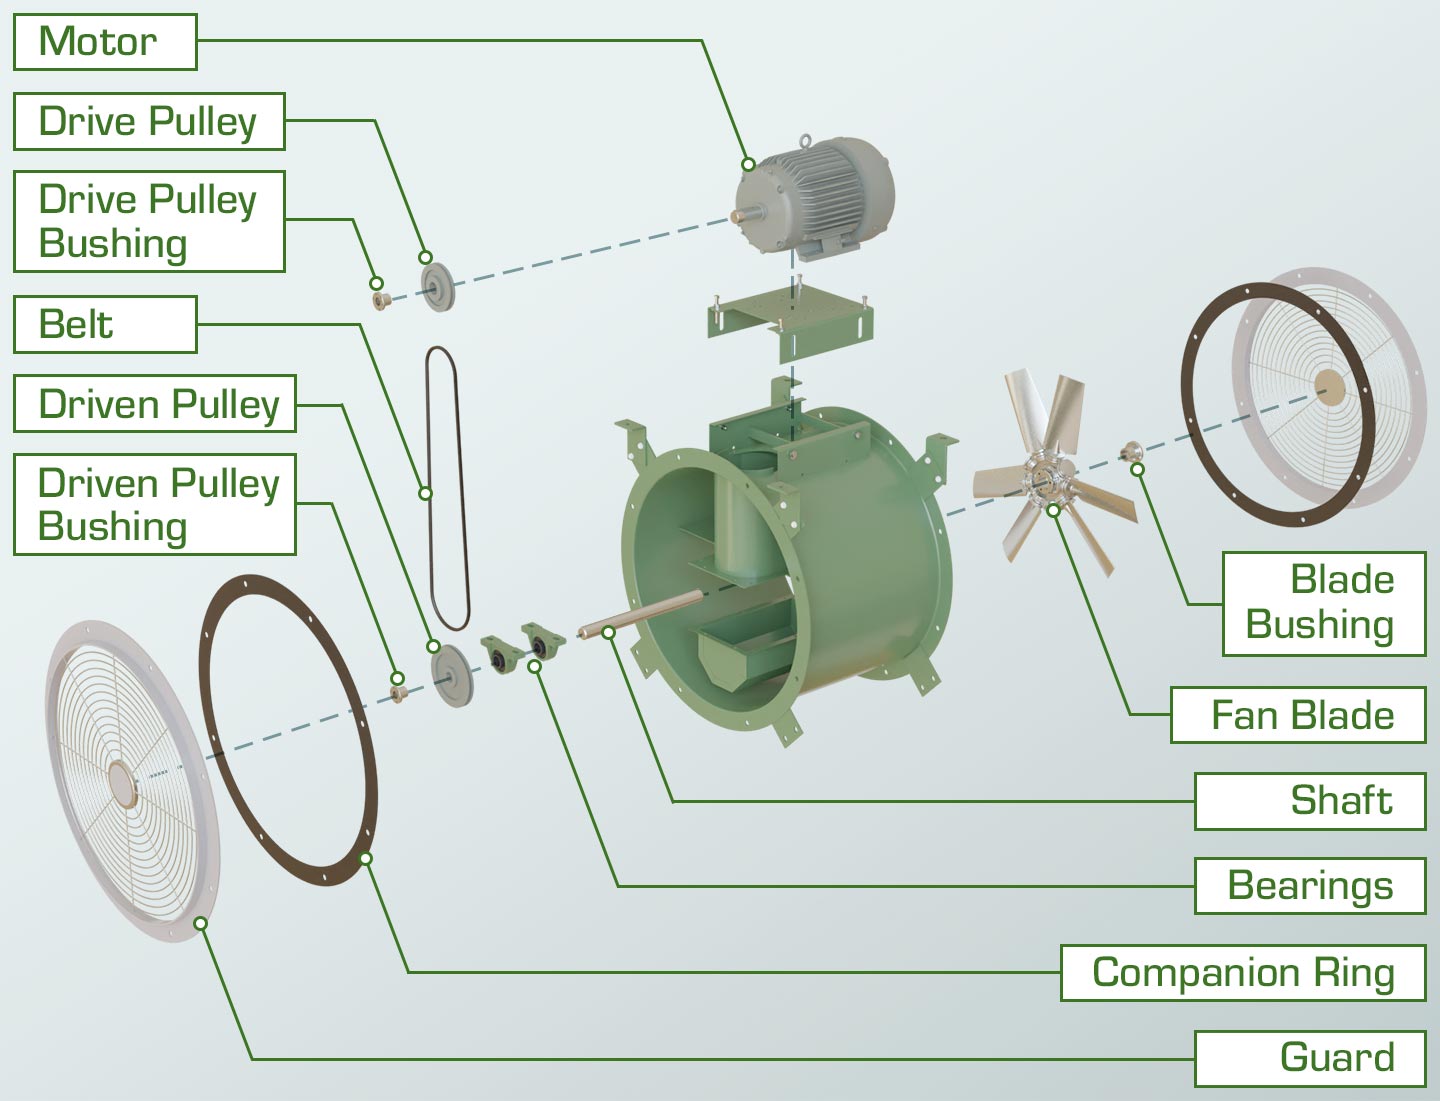 Exploded view of a belt drive tube axial fan with motor, drive pulley, drive pulley bushing, belt, driven pulley, driven pulley bushing, blade bushing, fan blade, shaft, bearings, companion ring and guard.